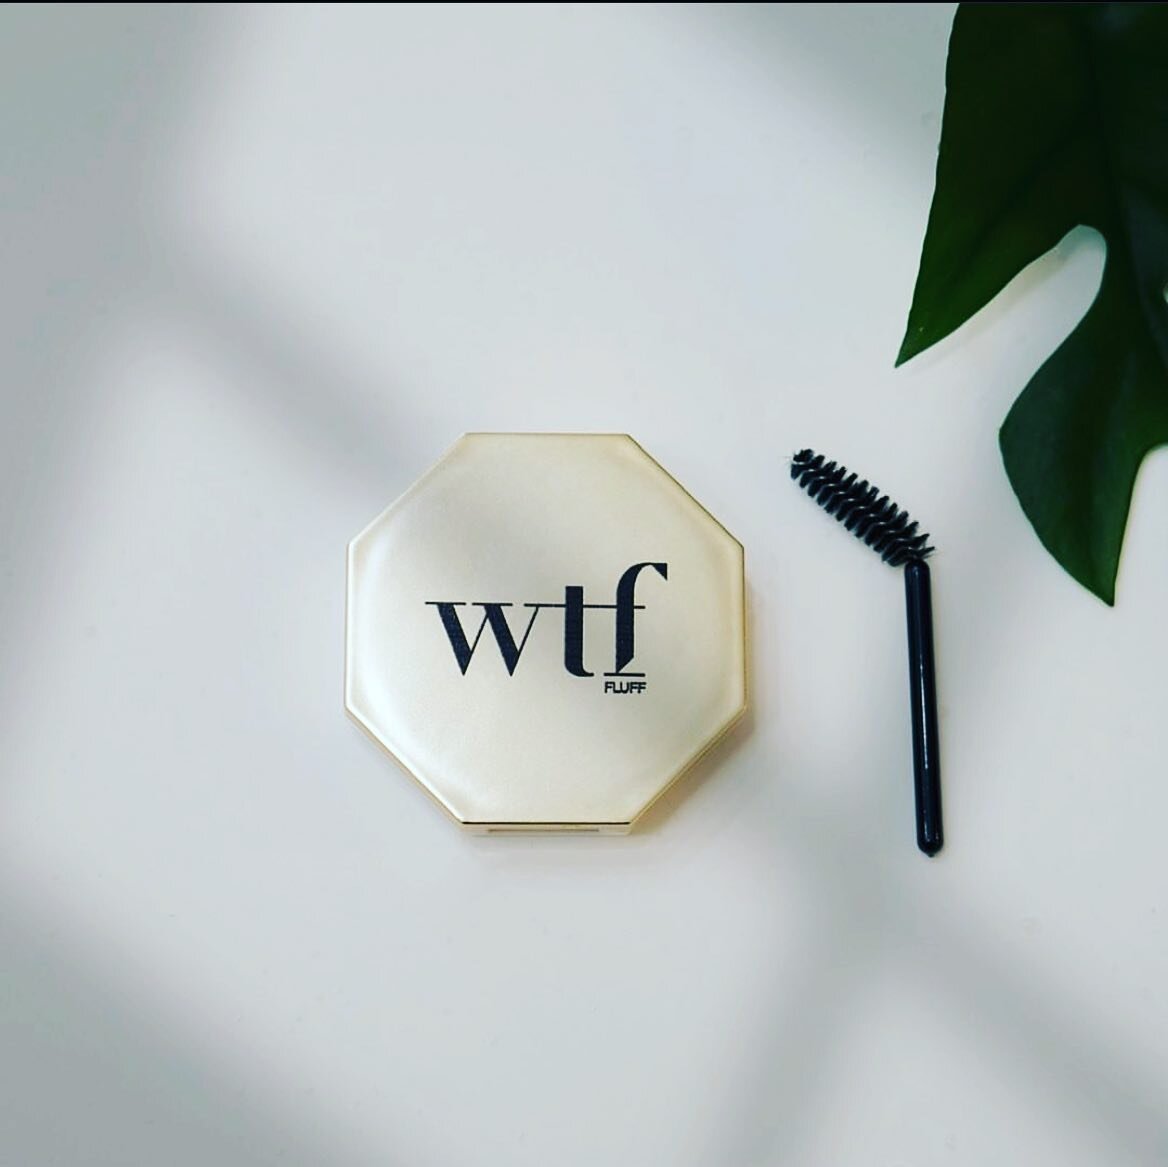 Do you use a brow styling wax?  Introducing WTFluff brow styling wax. 🤎🤎
&bull;
&bull;
&bull;
#gofluffingcrazy #browstylingwax #laminatebrows #perfectbrows